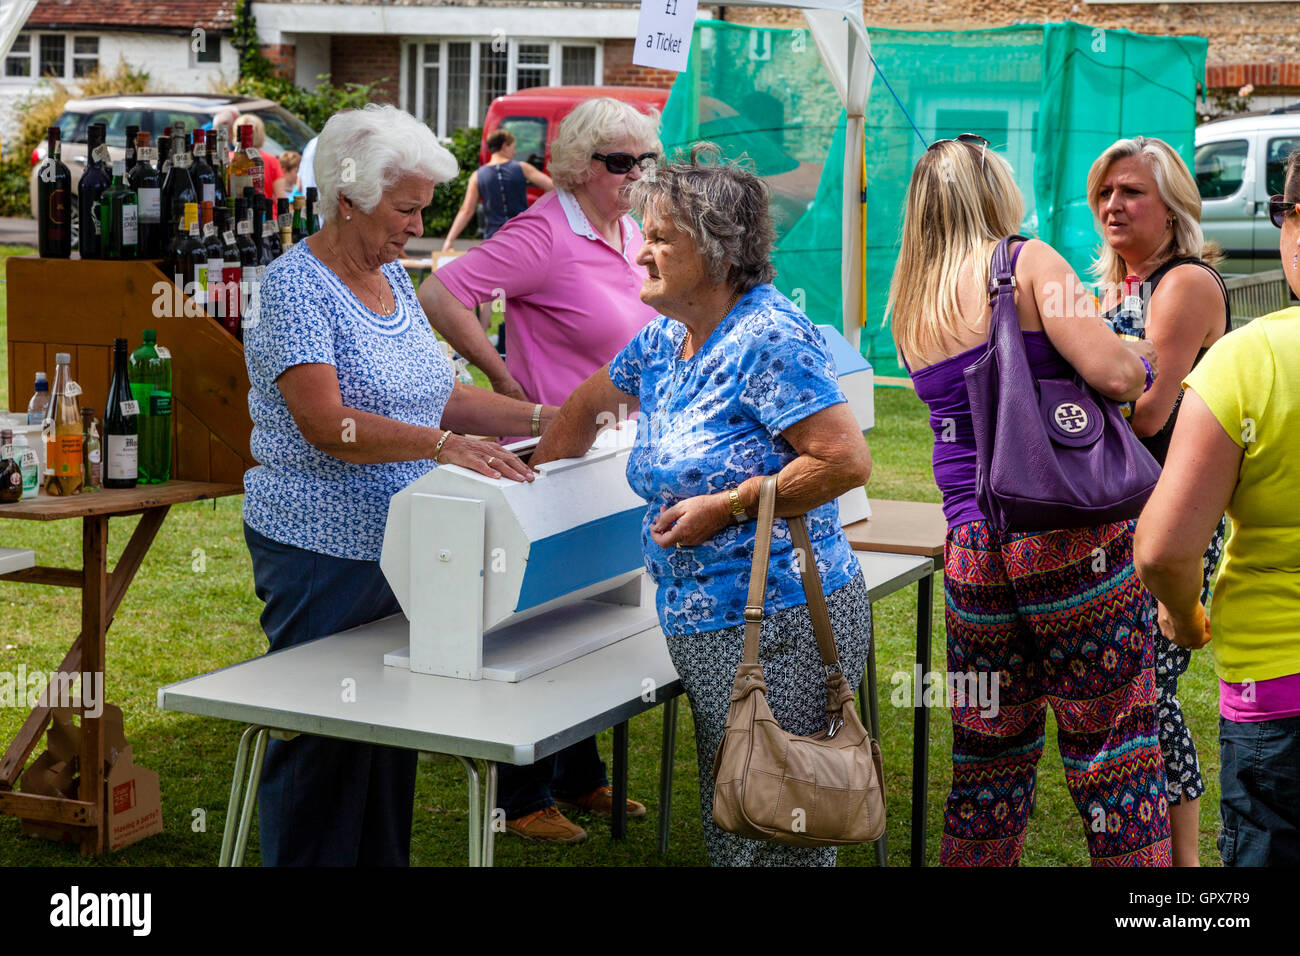 People Play The Tombola At The Annual Alfriston Village Fete, Alfriston, East Sussex, UK Stock Photo